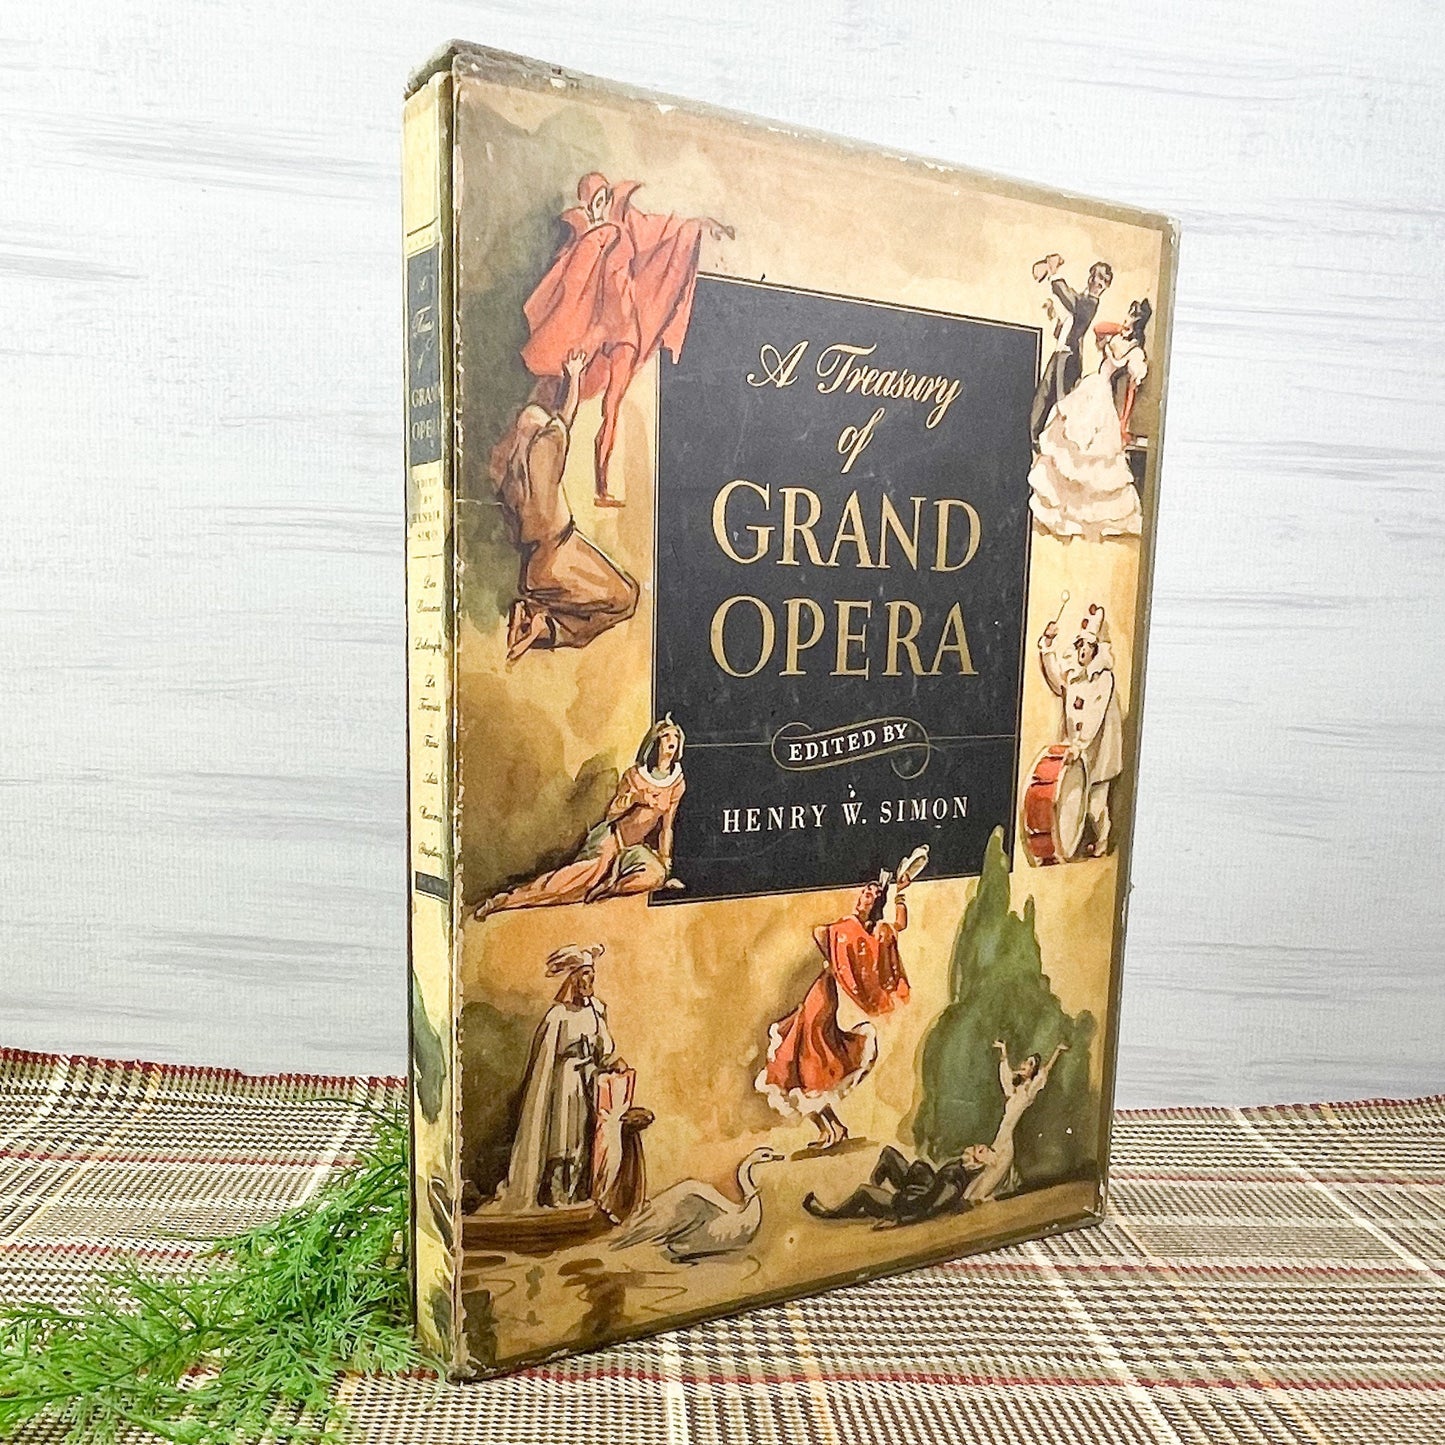 Vintage Music, A Tresury of Grand Opera, 1946 in protective box